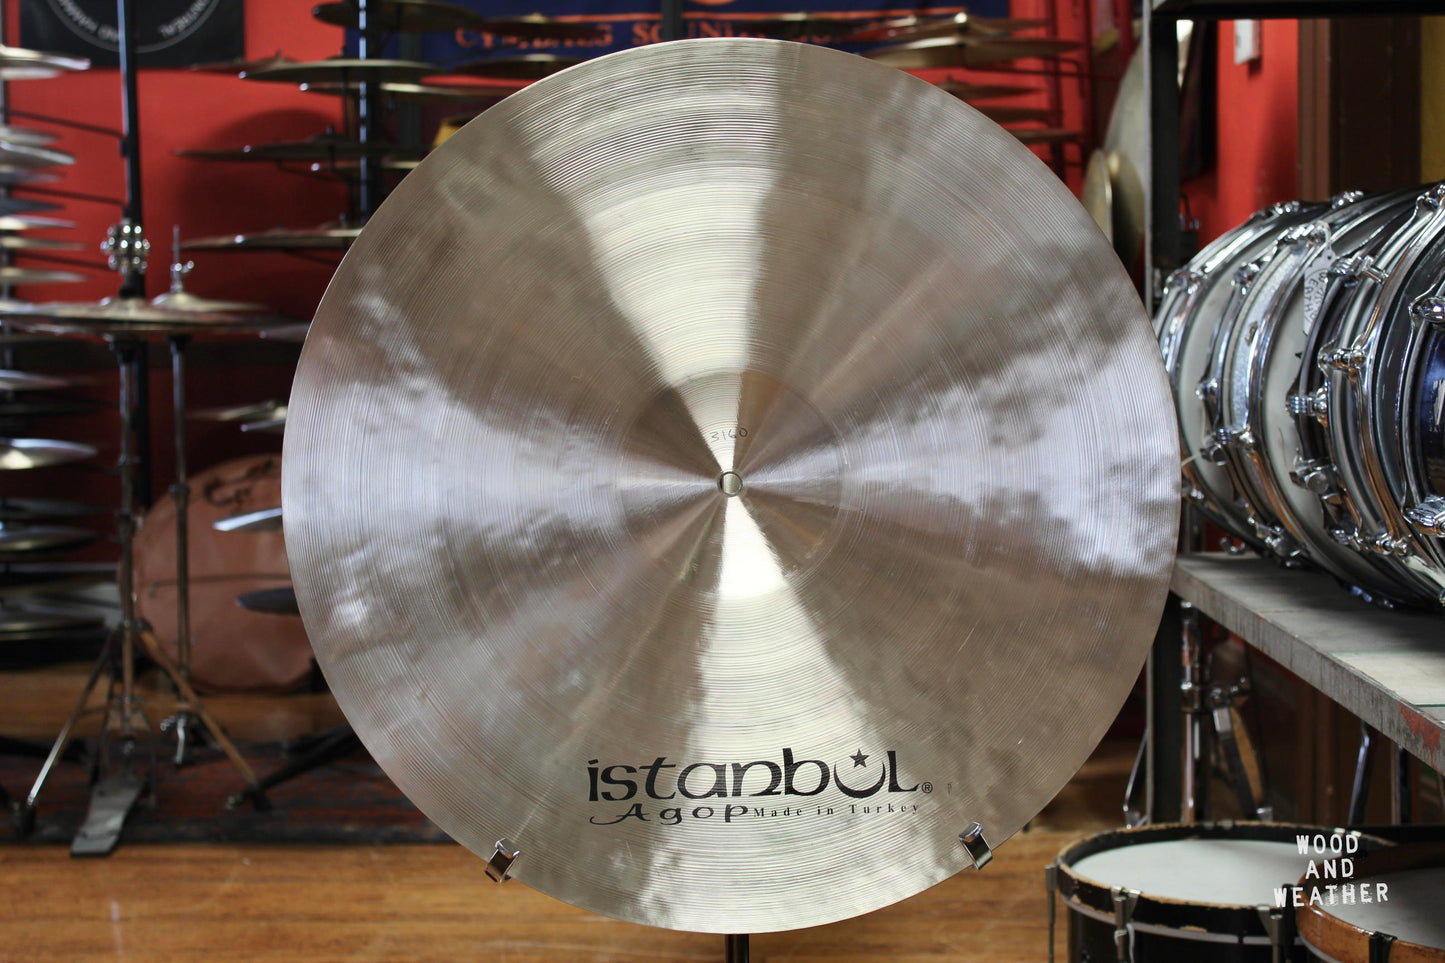 Istanbul Agop 22" Xist Natural Ride 3160g